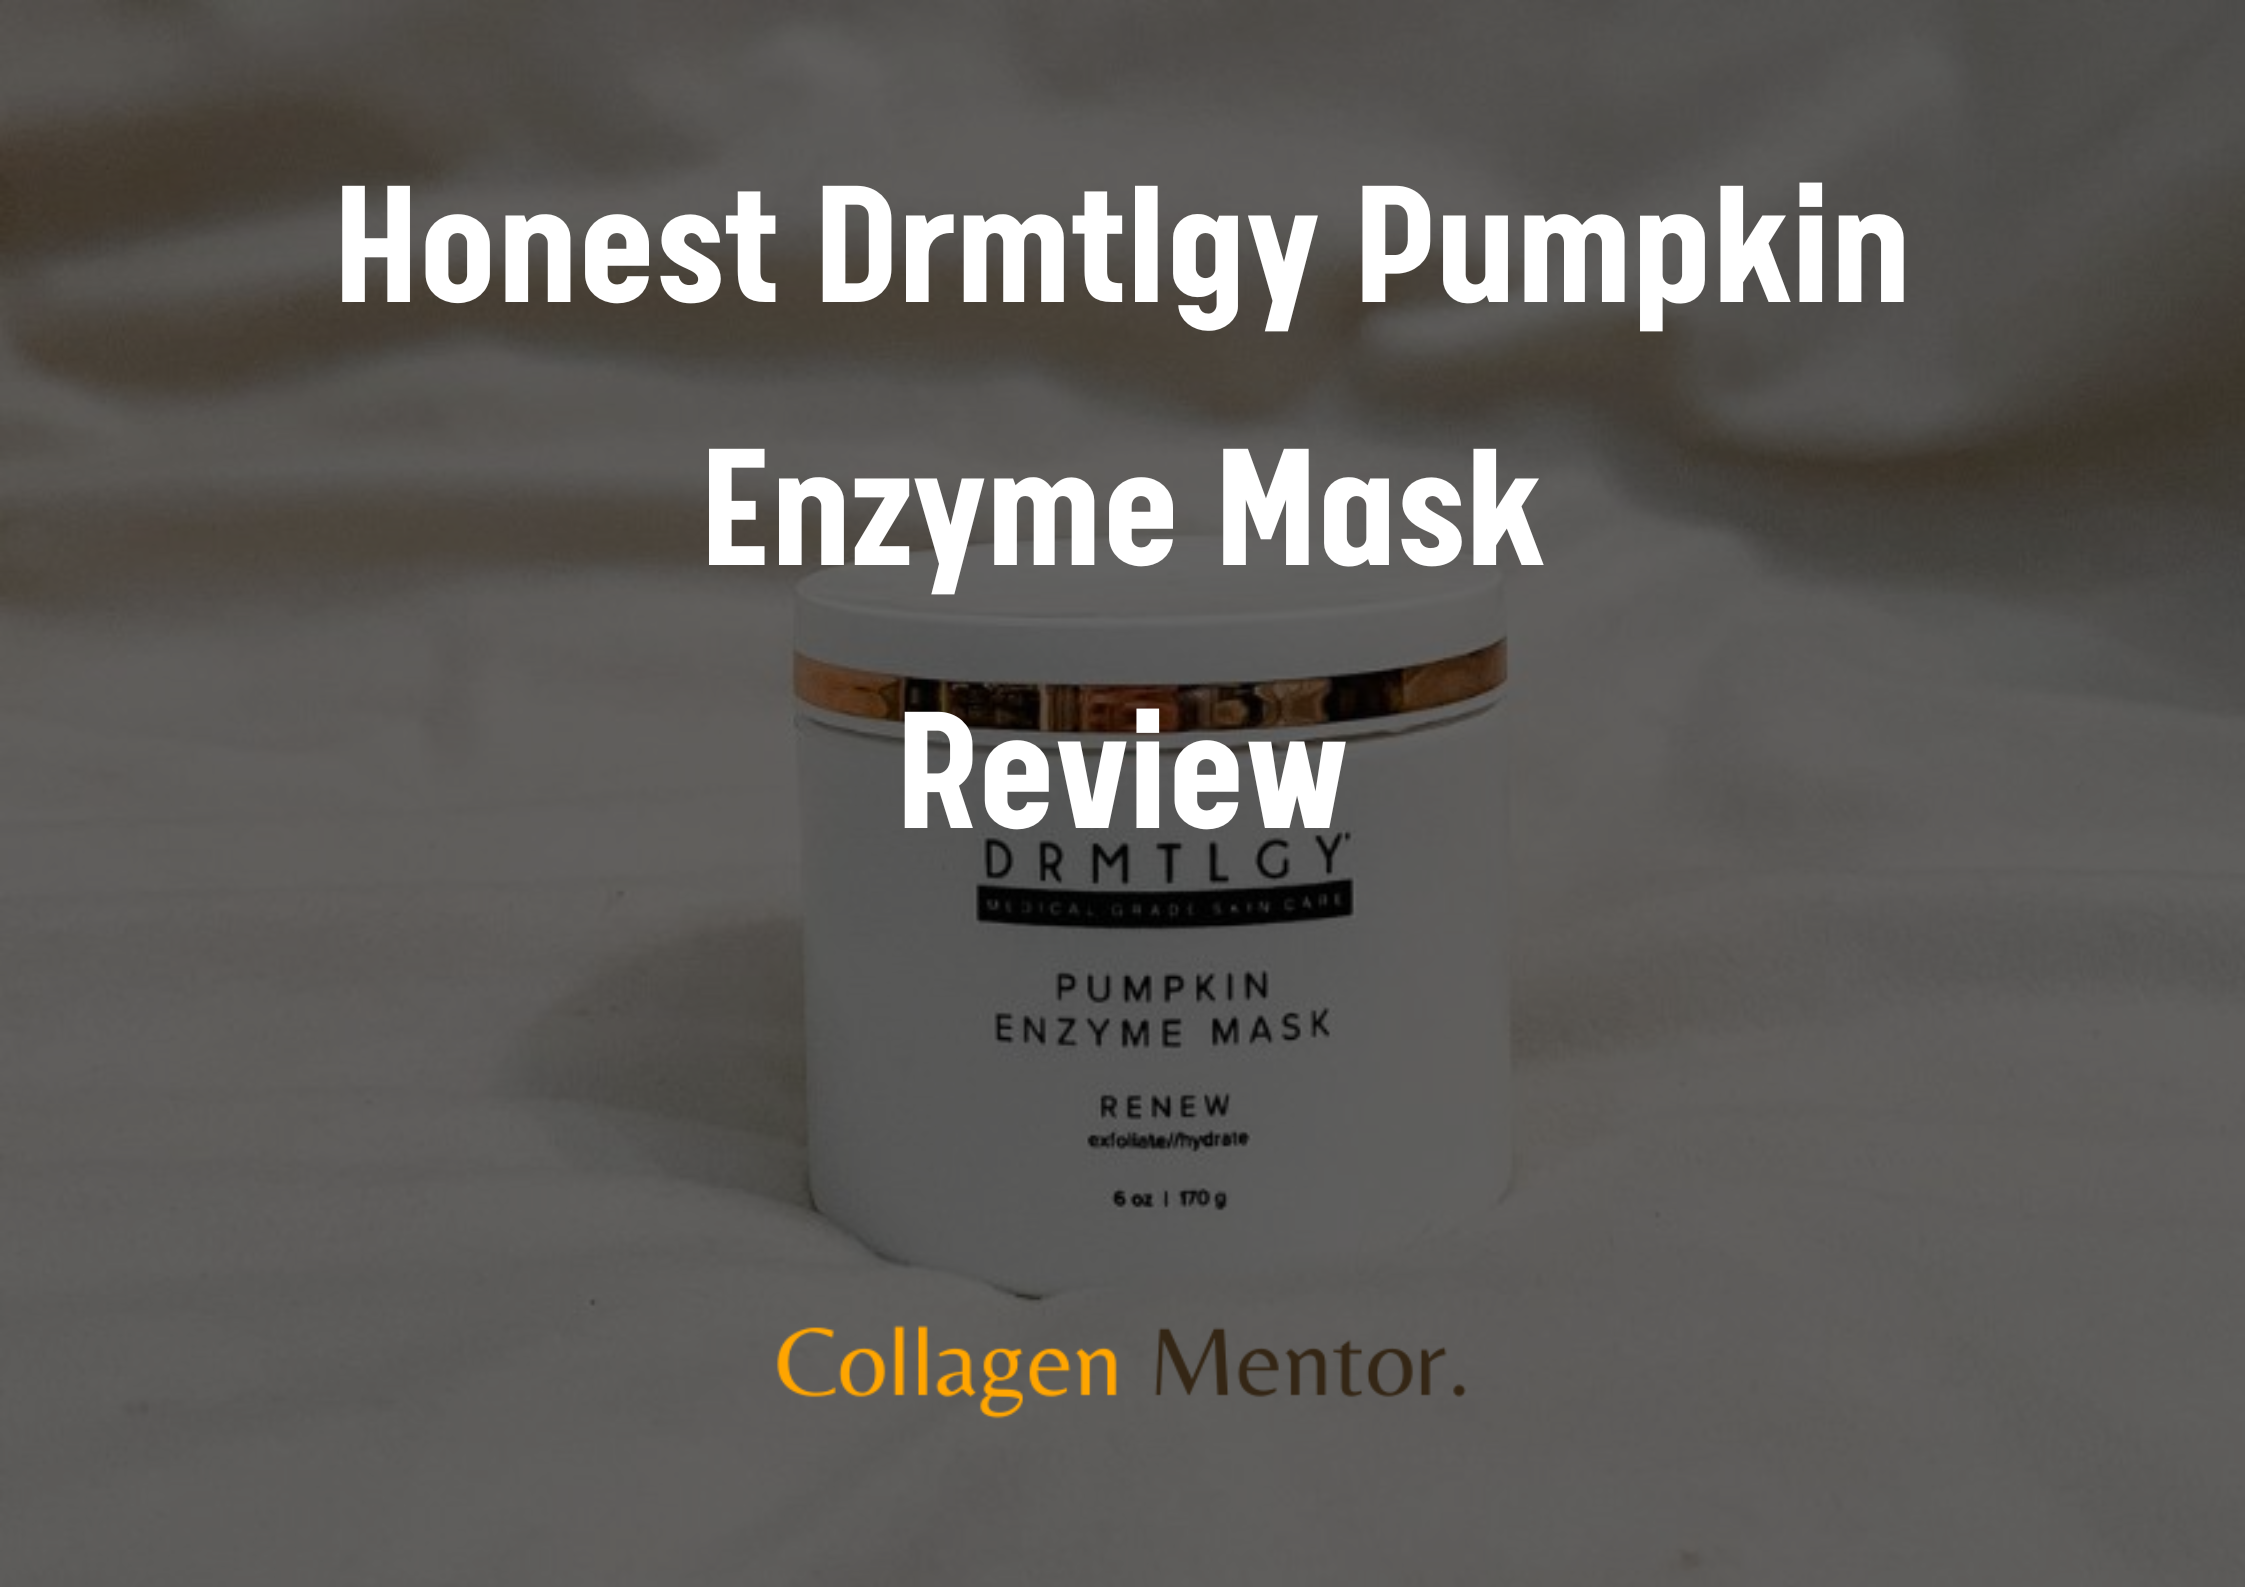 Drmtlgy Pumpkin Enzyme Mask Reviews